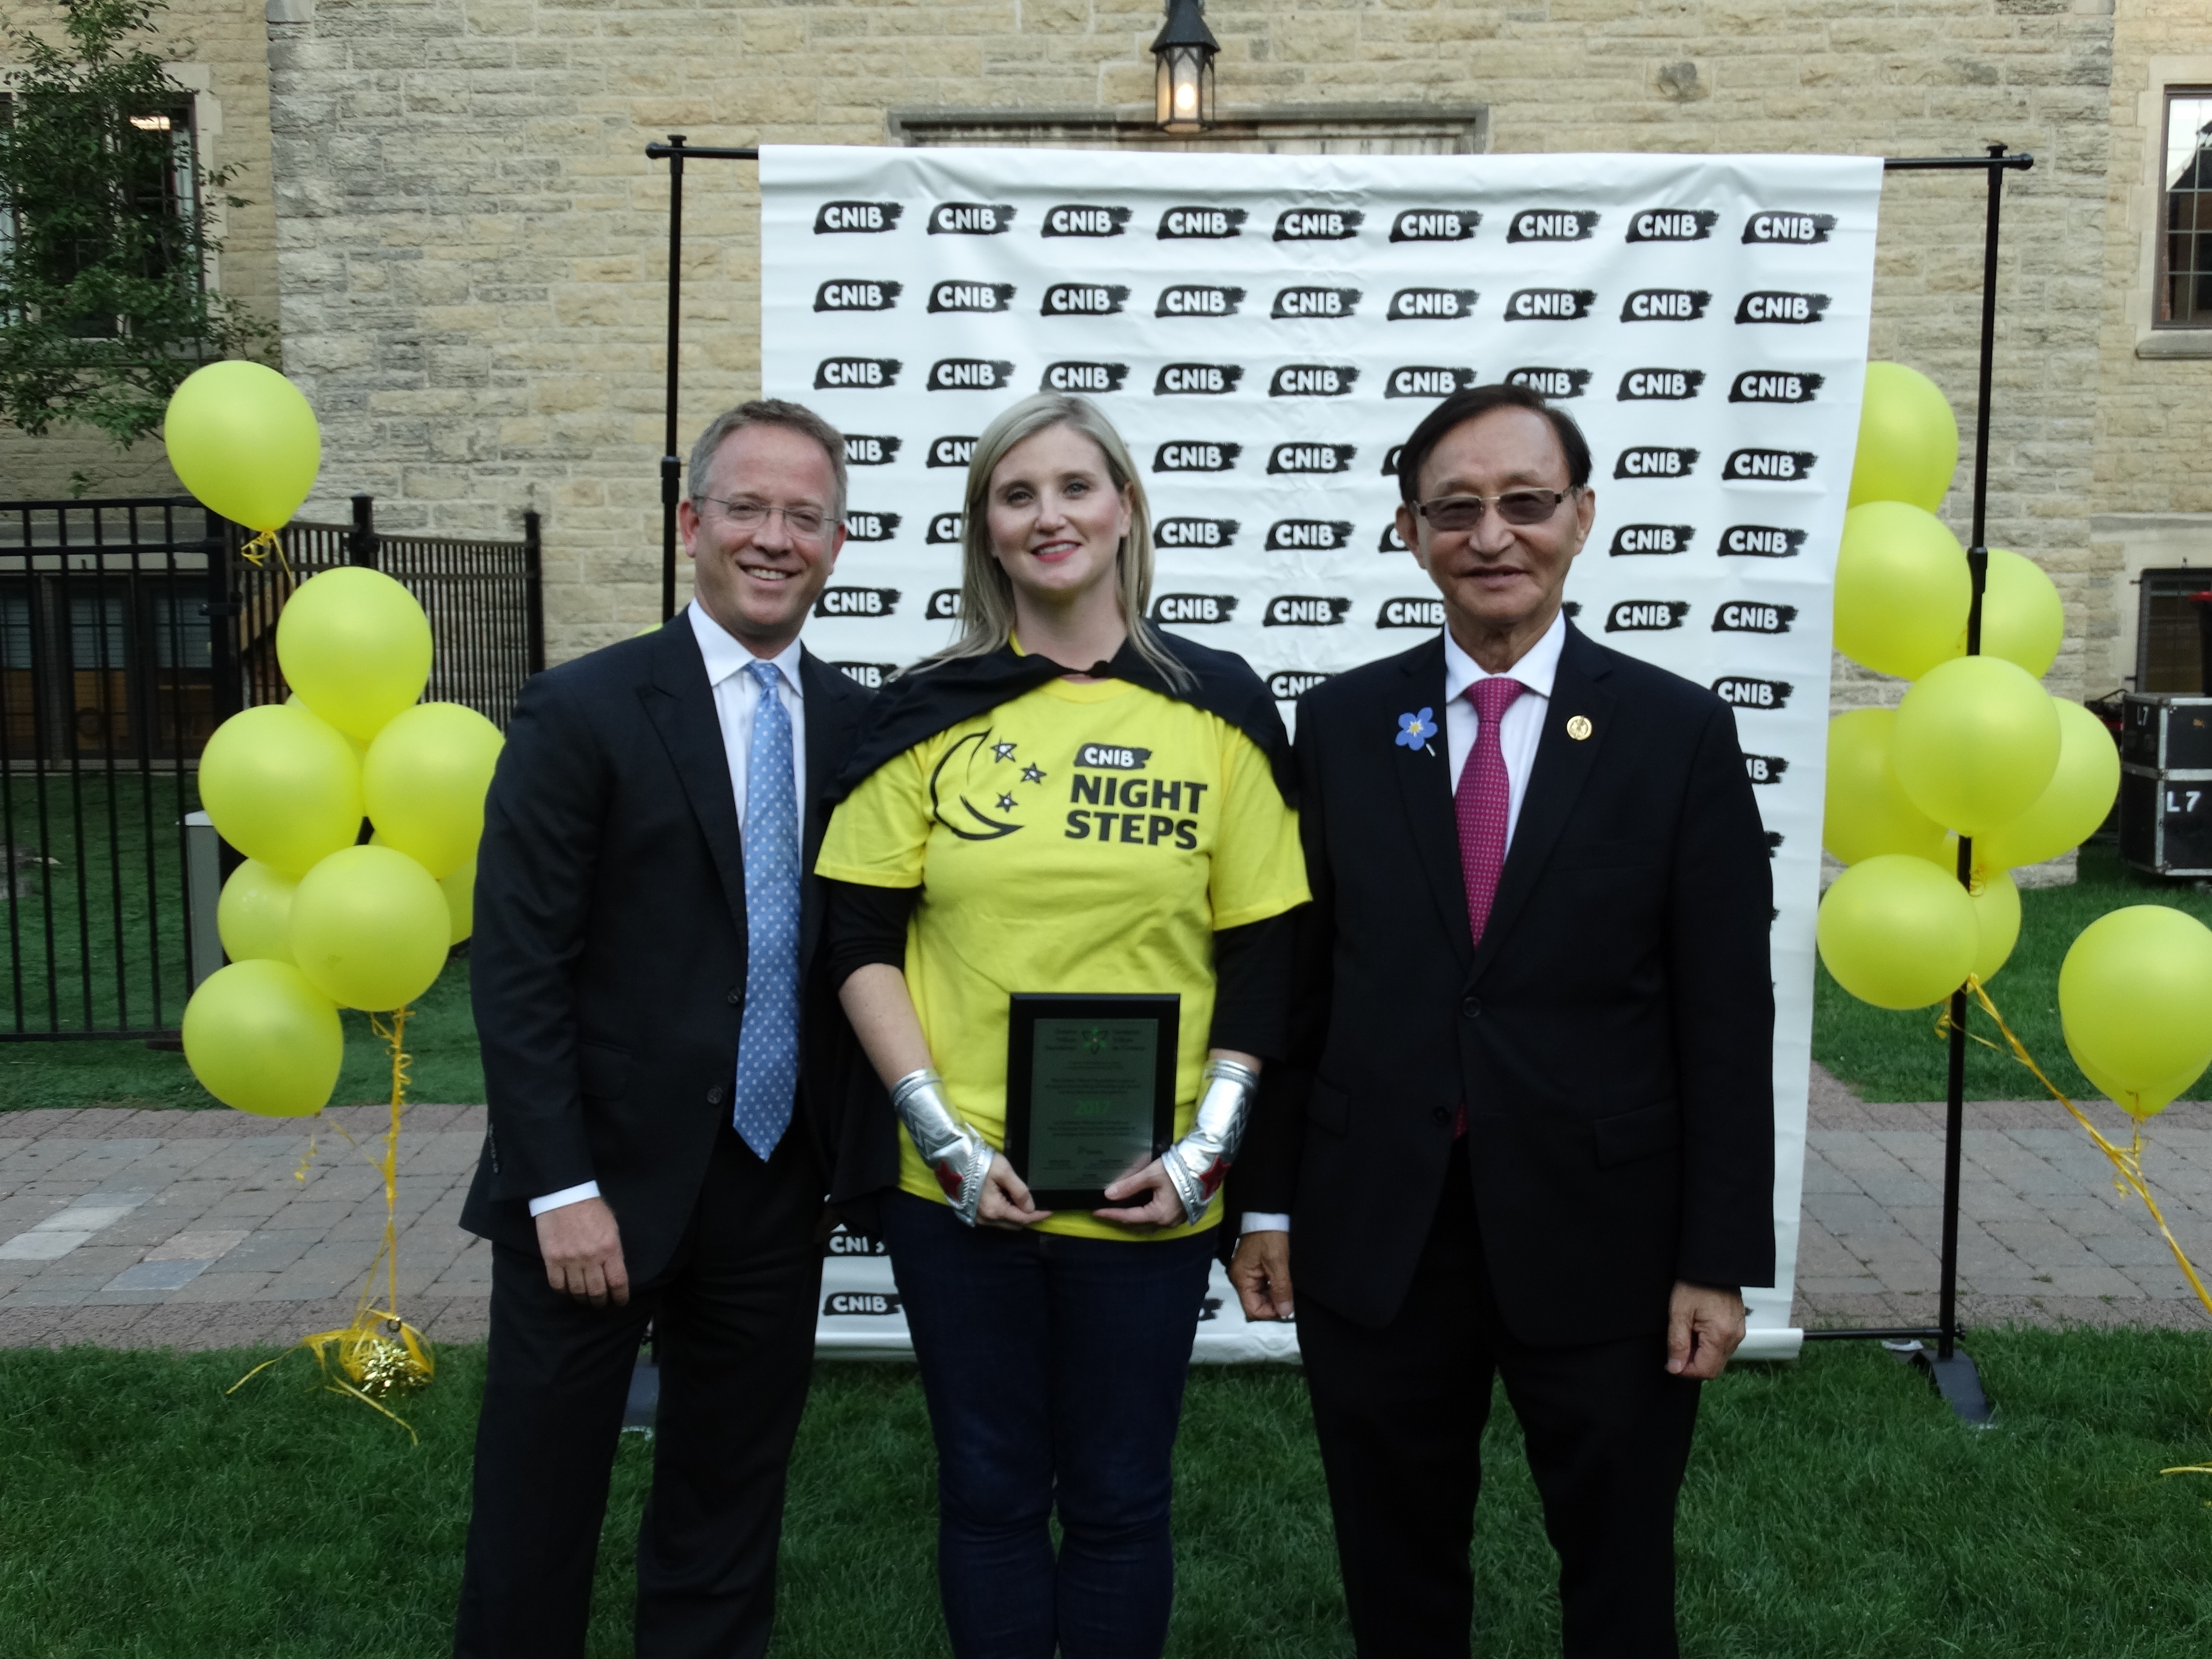 Justin Mooney, Suzanne Decary-Van den Broek and Minister Raymond Cho pose in front of a CNIB branded backdrop. Suzanne is holding a plaque. 